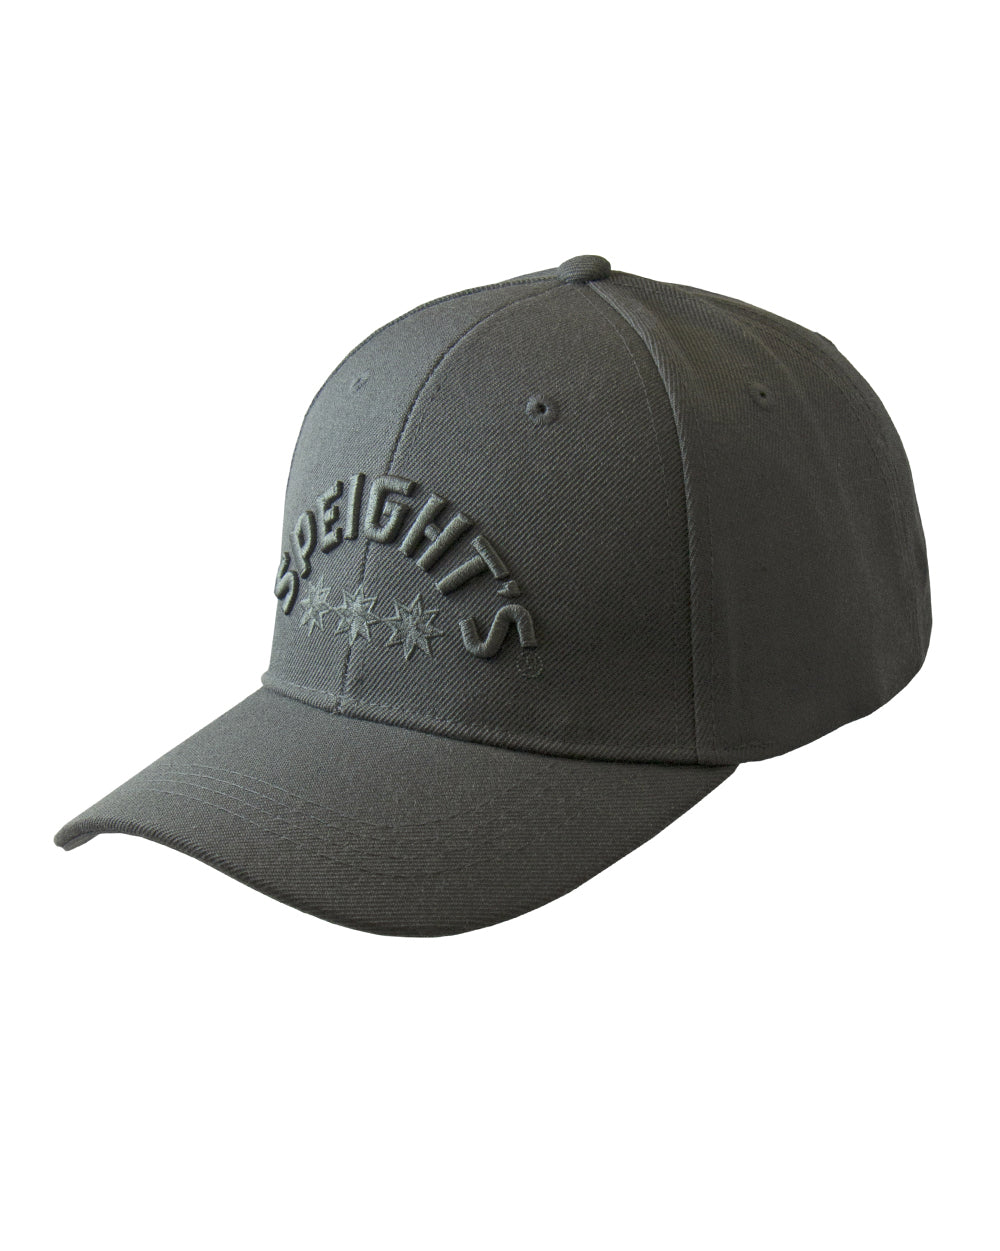 Speight's Cap - Grey -  Beer Gear Apparel & Merchandise - Speights - Lion Red - VB - Tokyo Dy merch